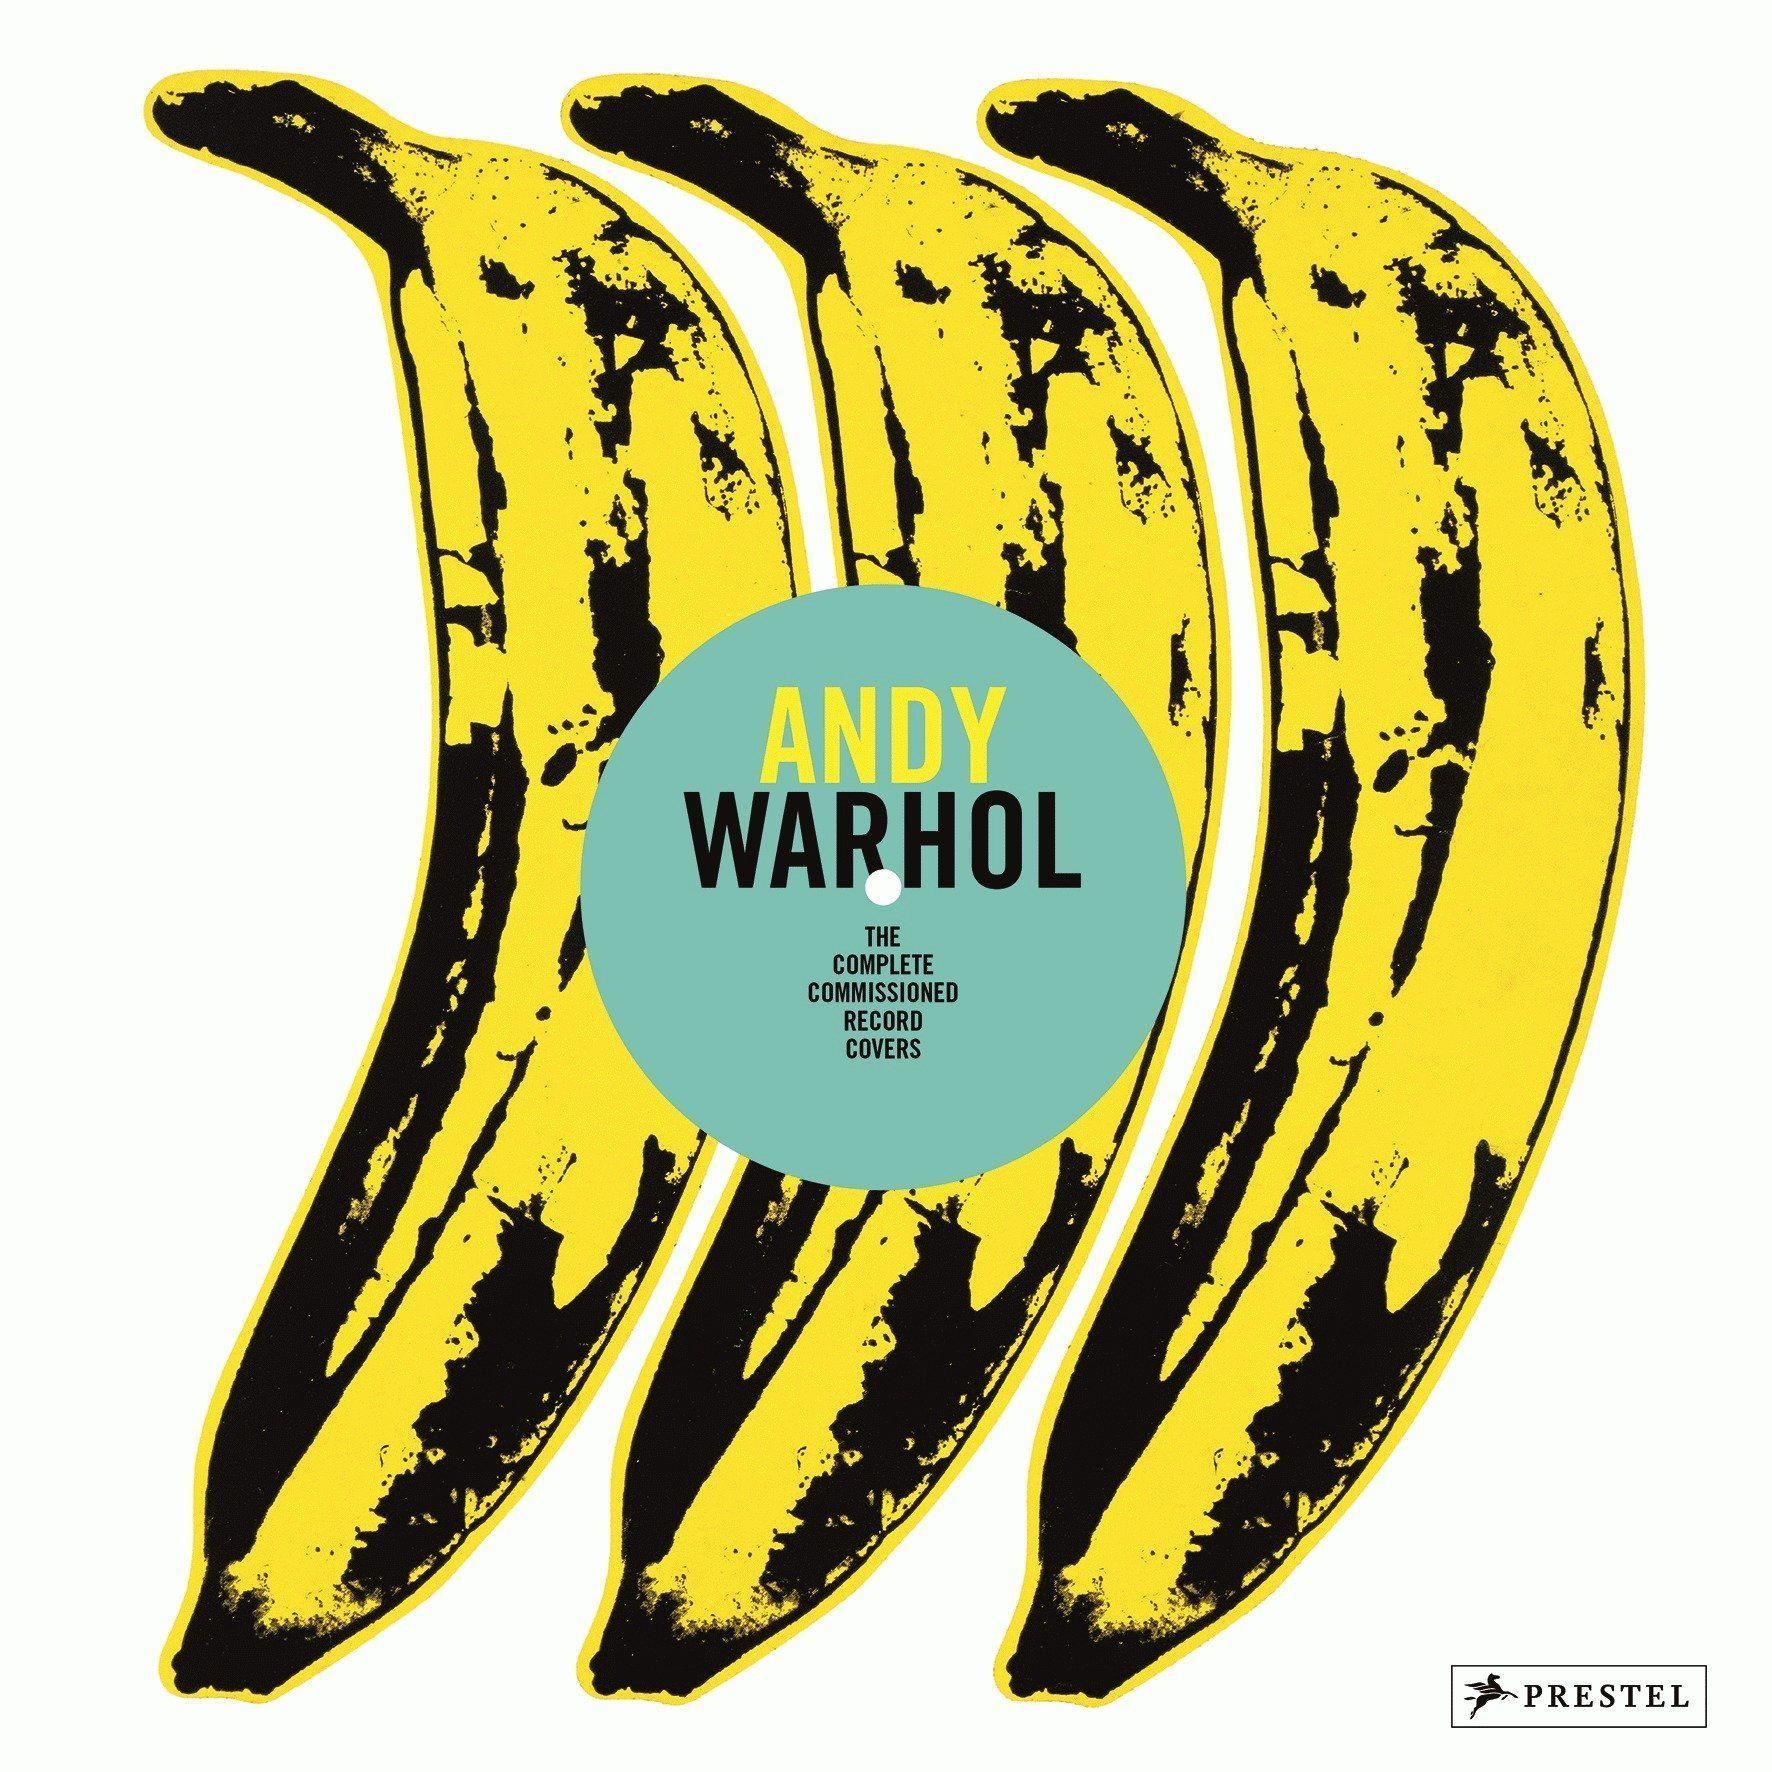 Andy Warhol Logo - Andy Warhol: The Complete Commissioned Record Covers: Paul Marechal